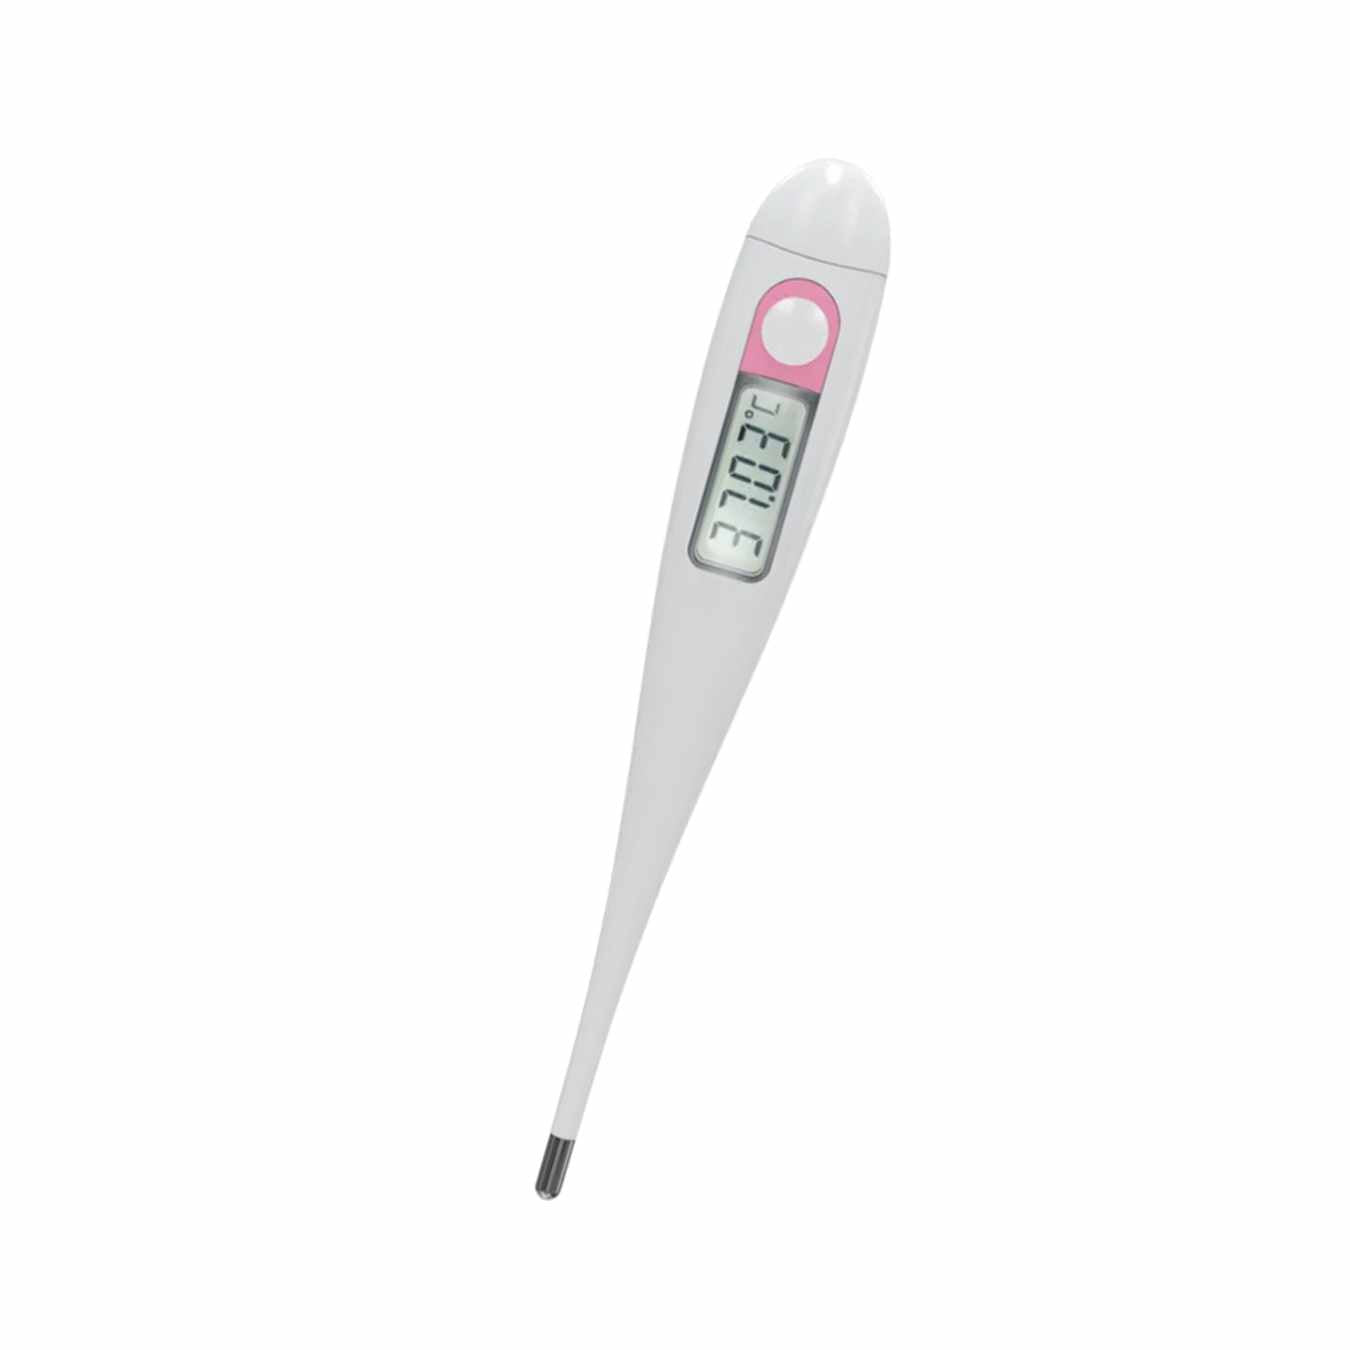 Basal Body Temperature Thermometer: Precise to Two Decimal Points for Ovulation Tracking